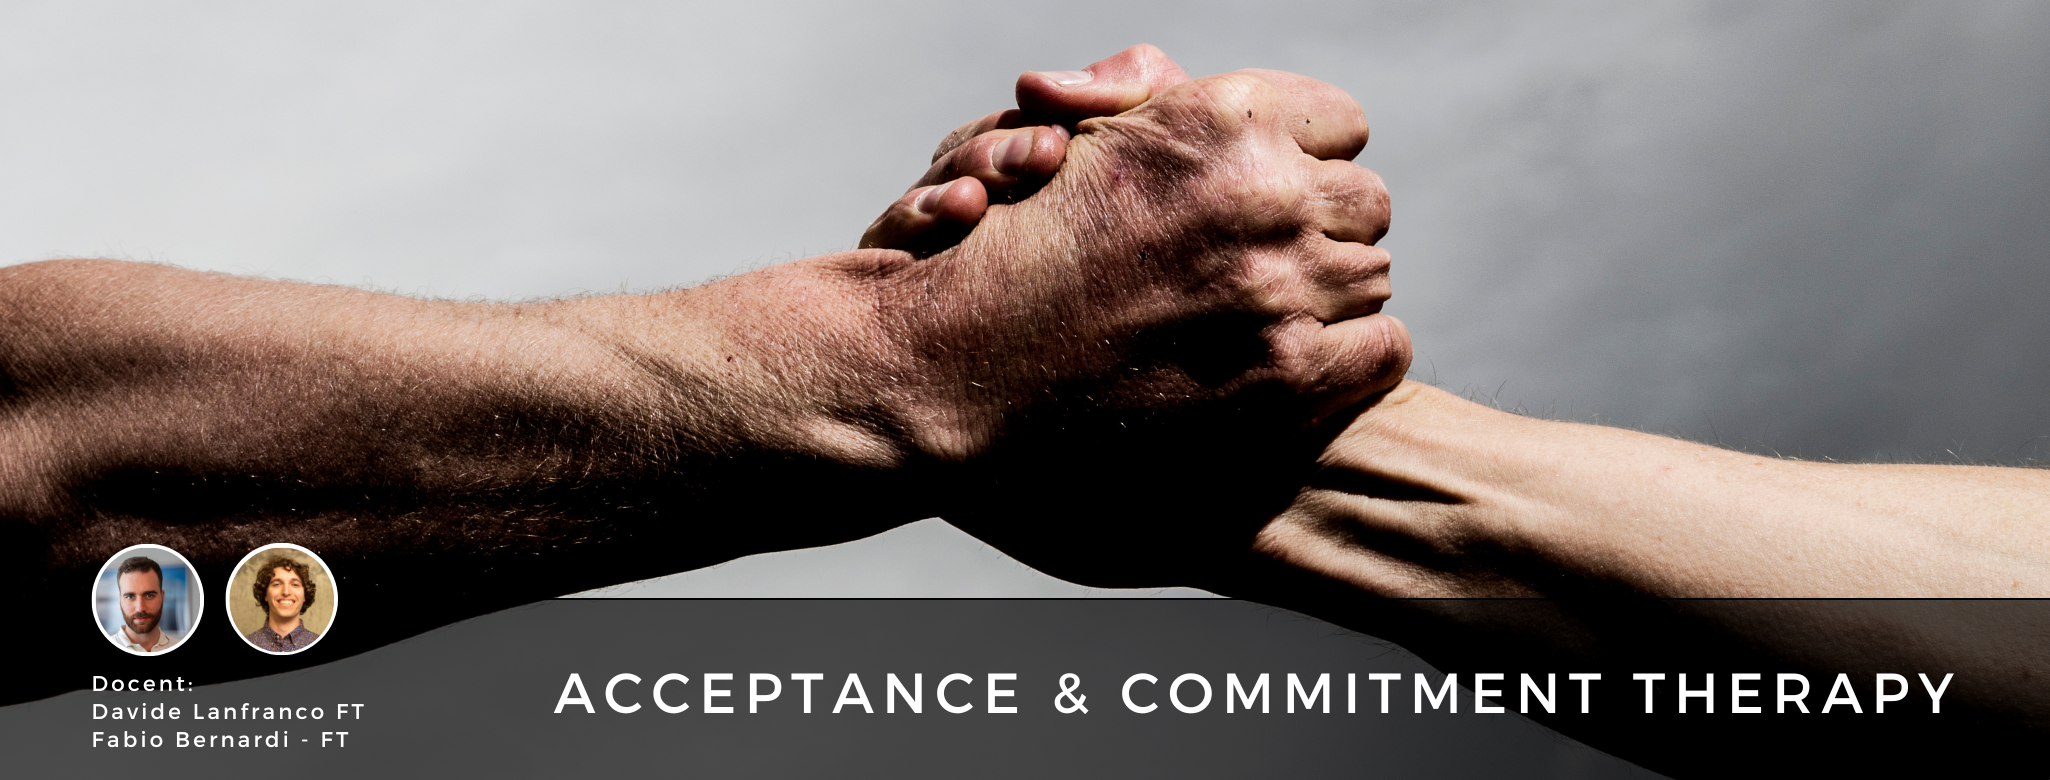 ACCEPTANCE & COMMITMENT THERAPY (ACT)